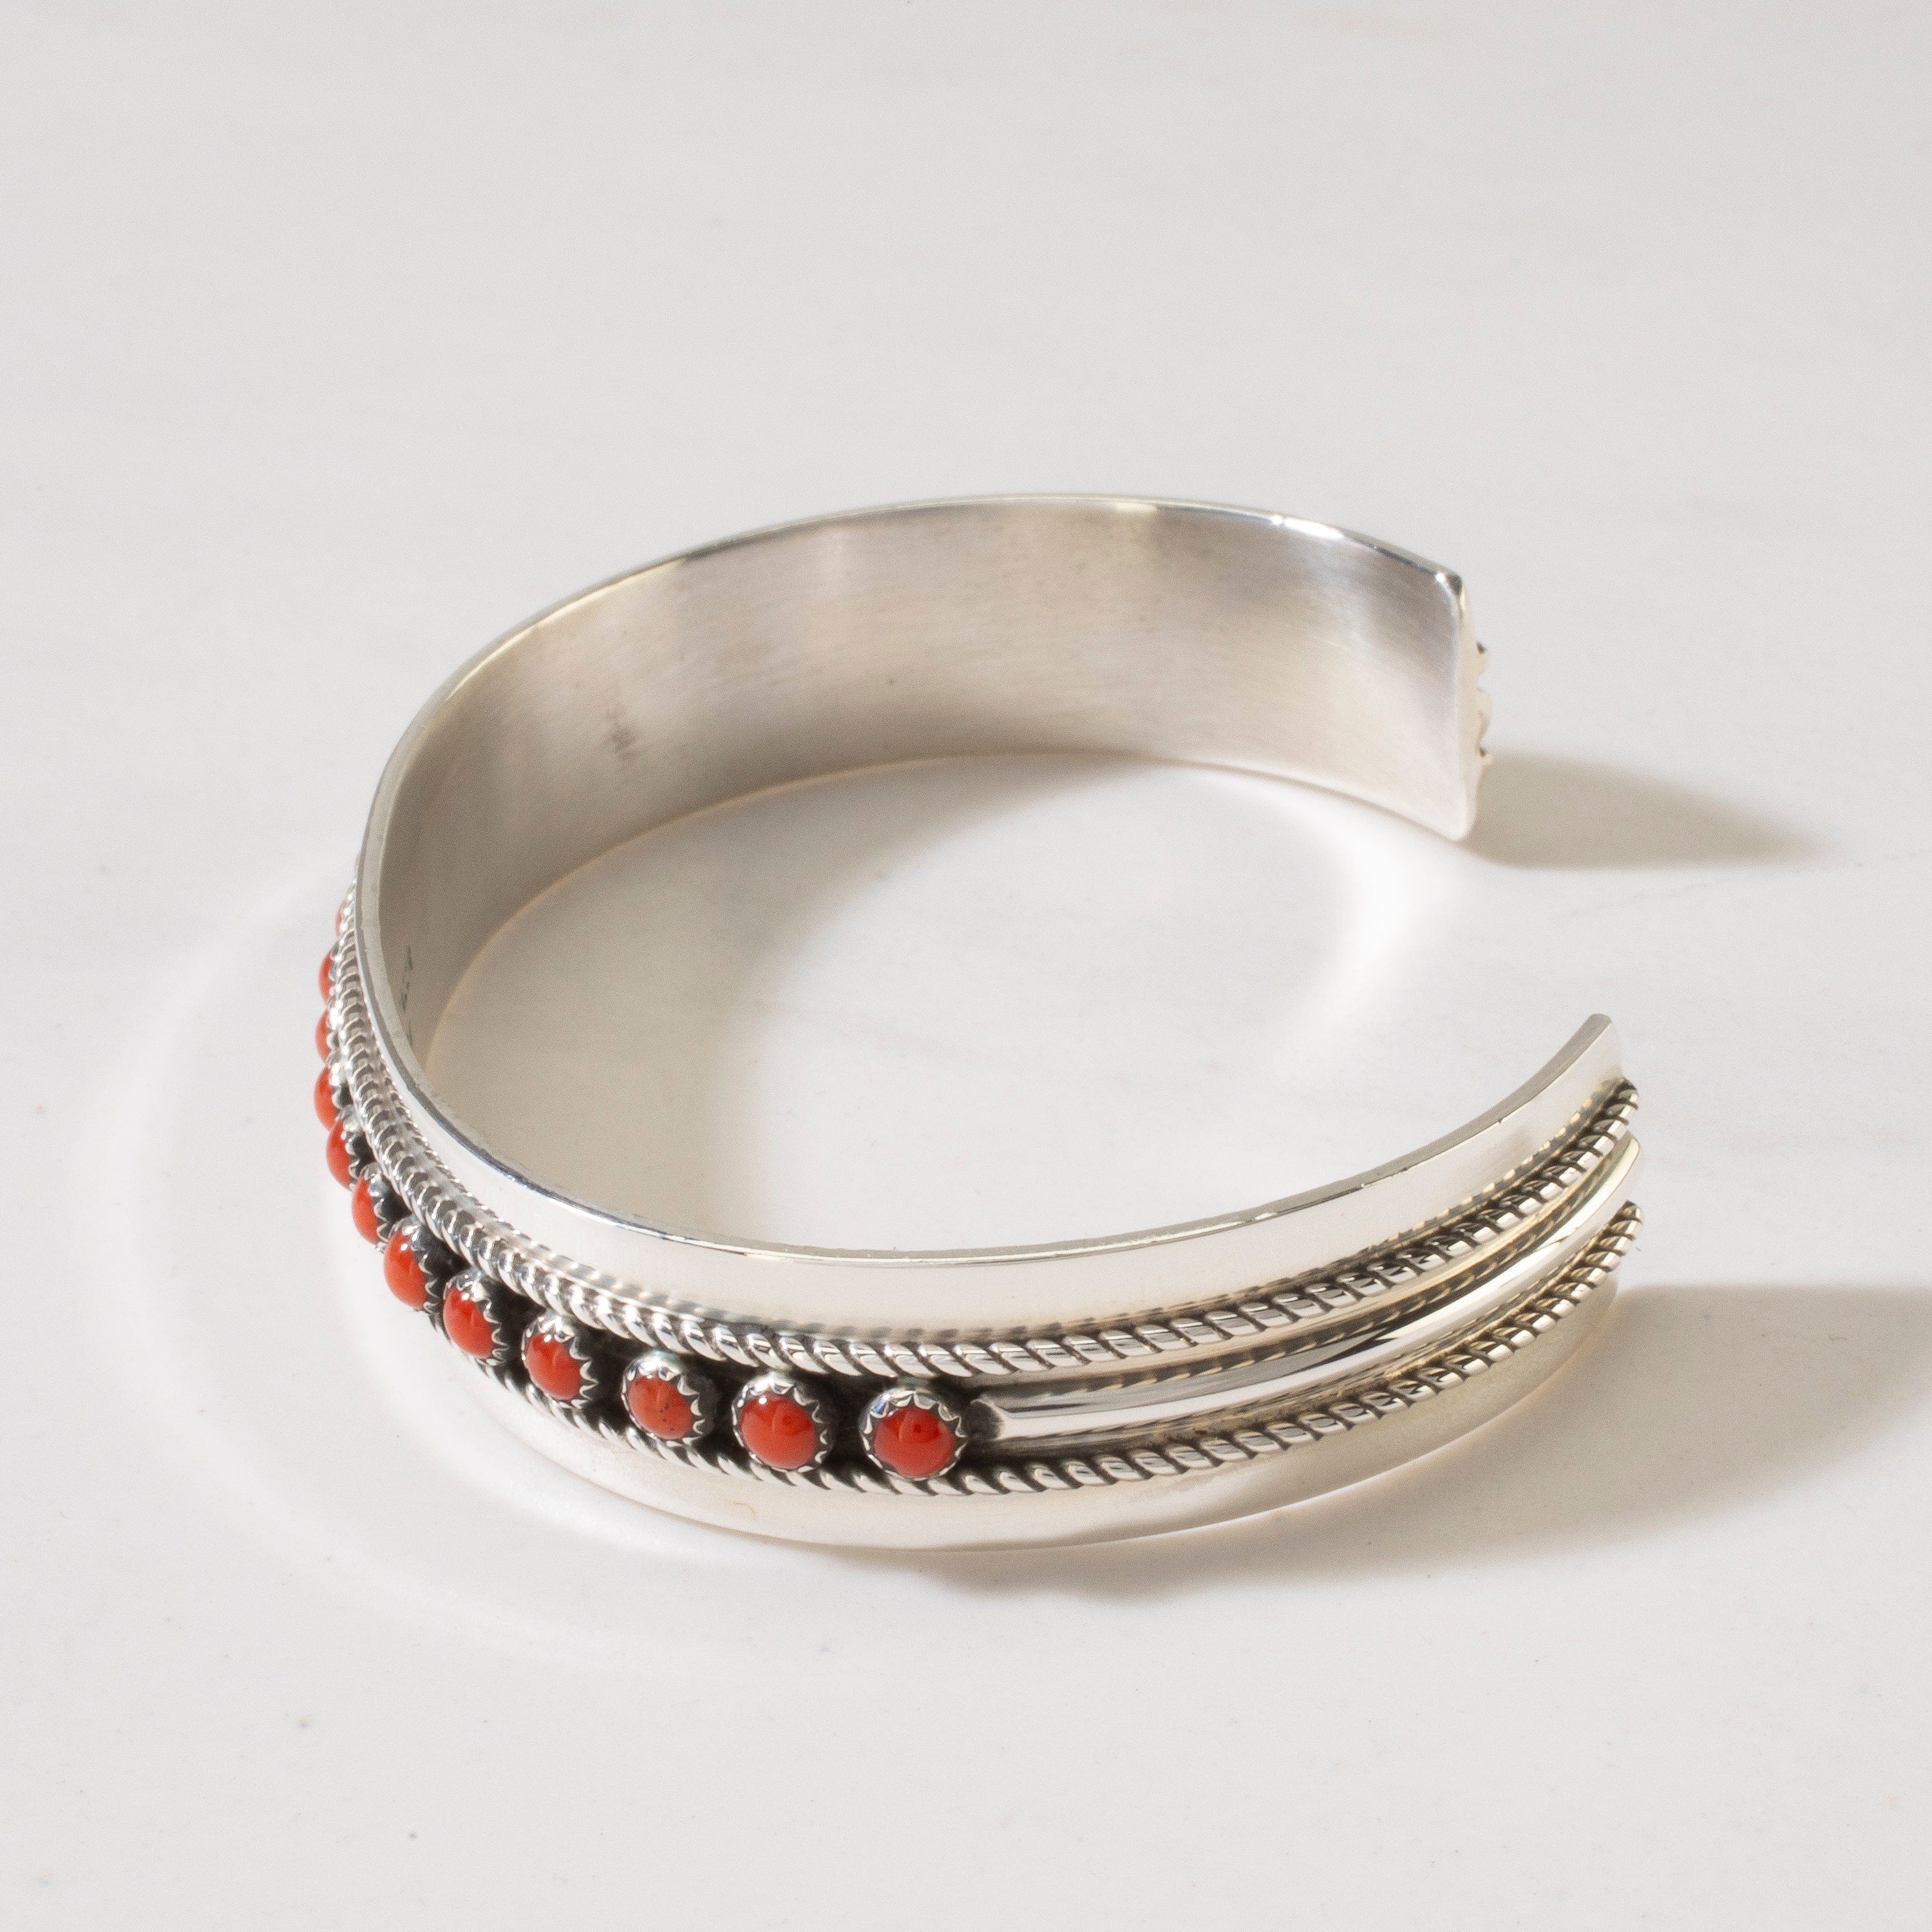 Kalifano Native American Jewelry Patrick Yazzie Navajo Red Coral USA Native American Made 925 Sterling Silver Cuff NAB1000.009